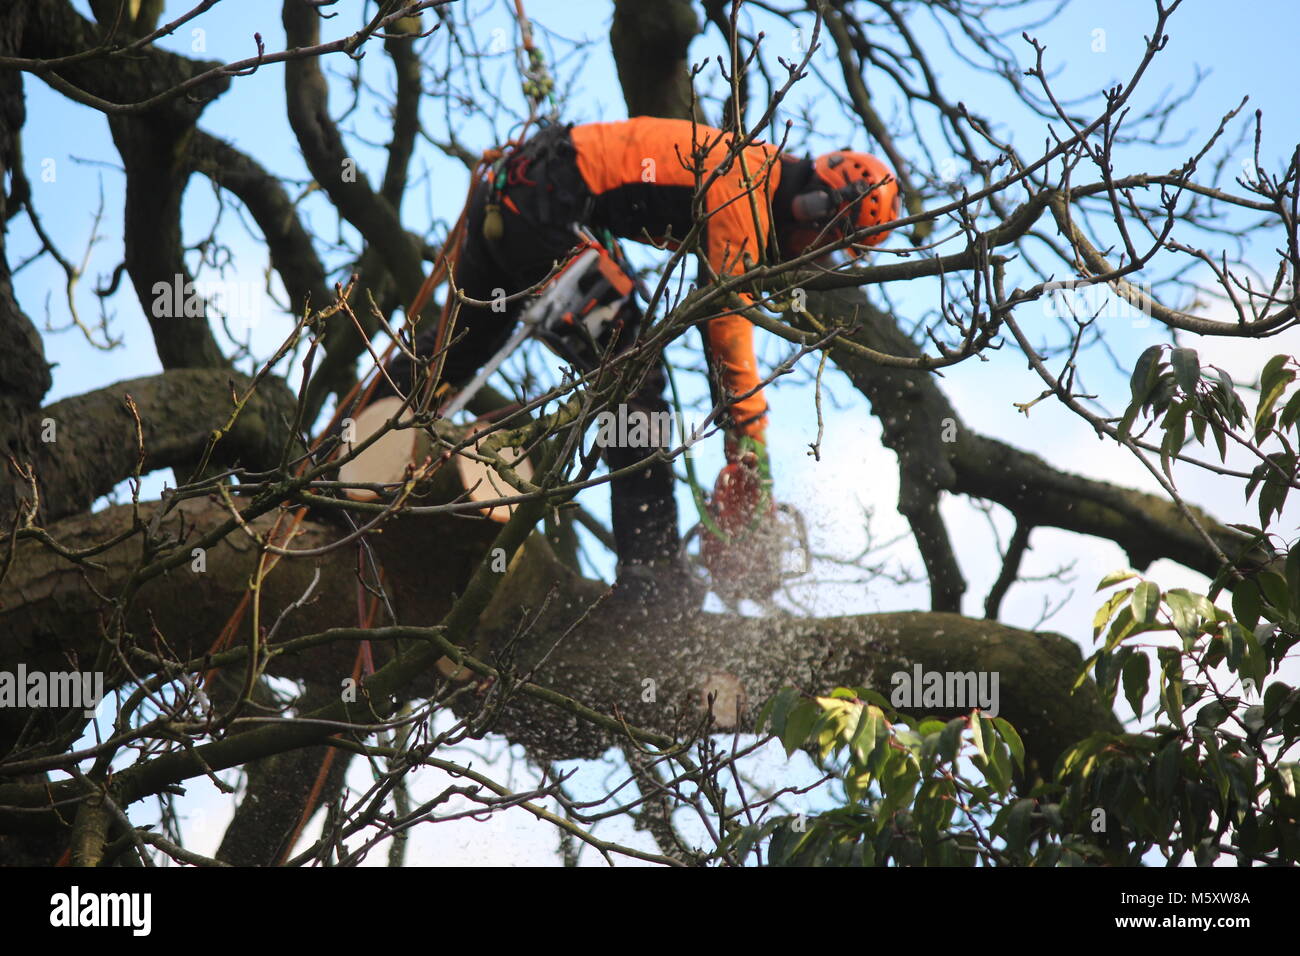 Tree surgeon operating his chainsaw in a tree attached to ropes sawing off large branches Stock Photo